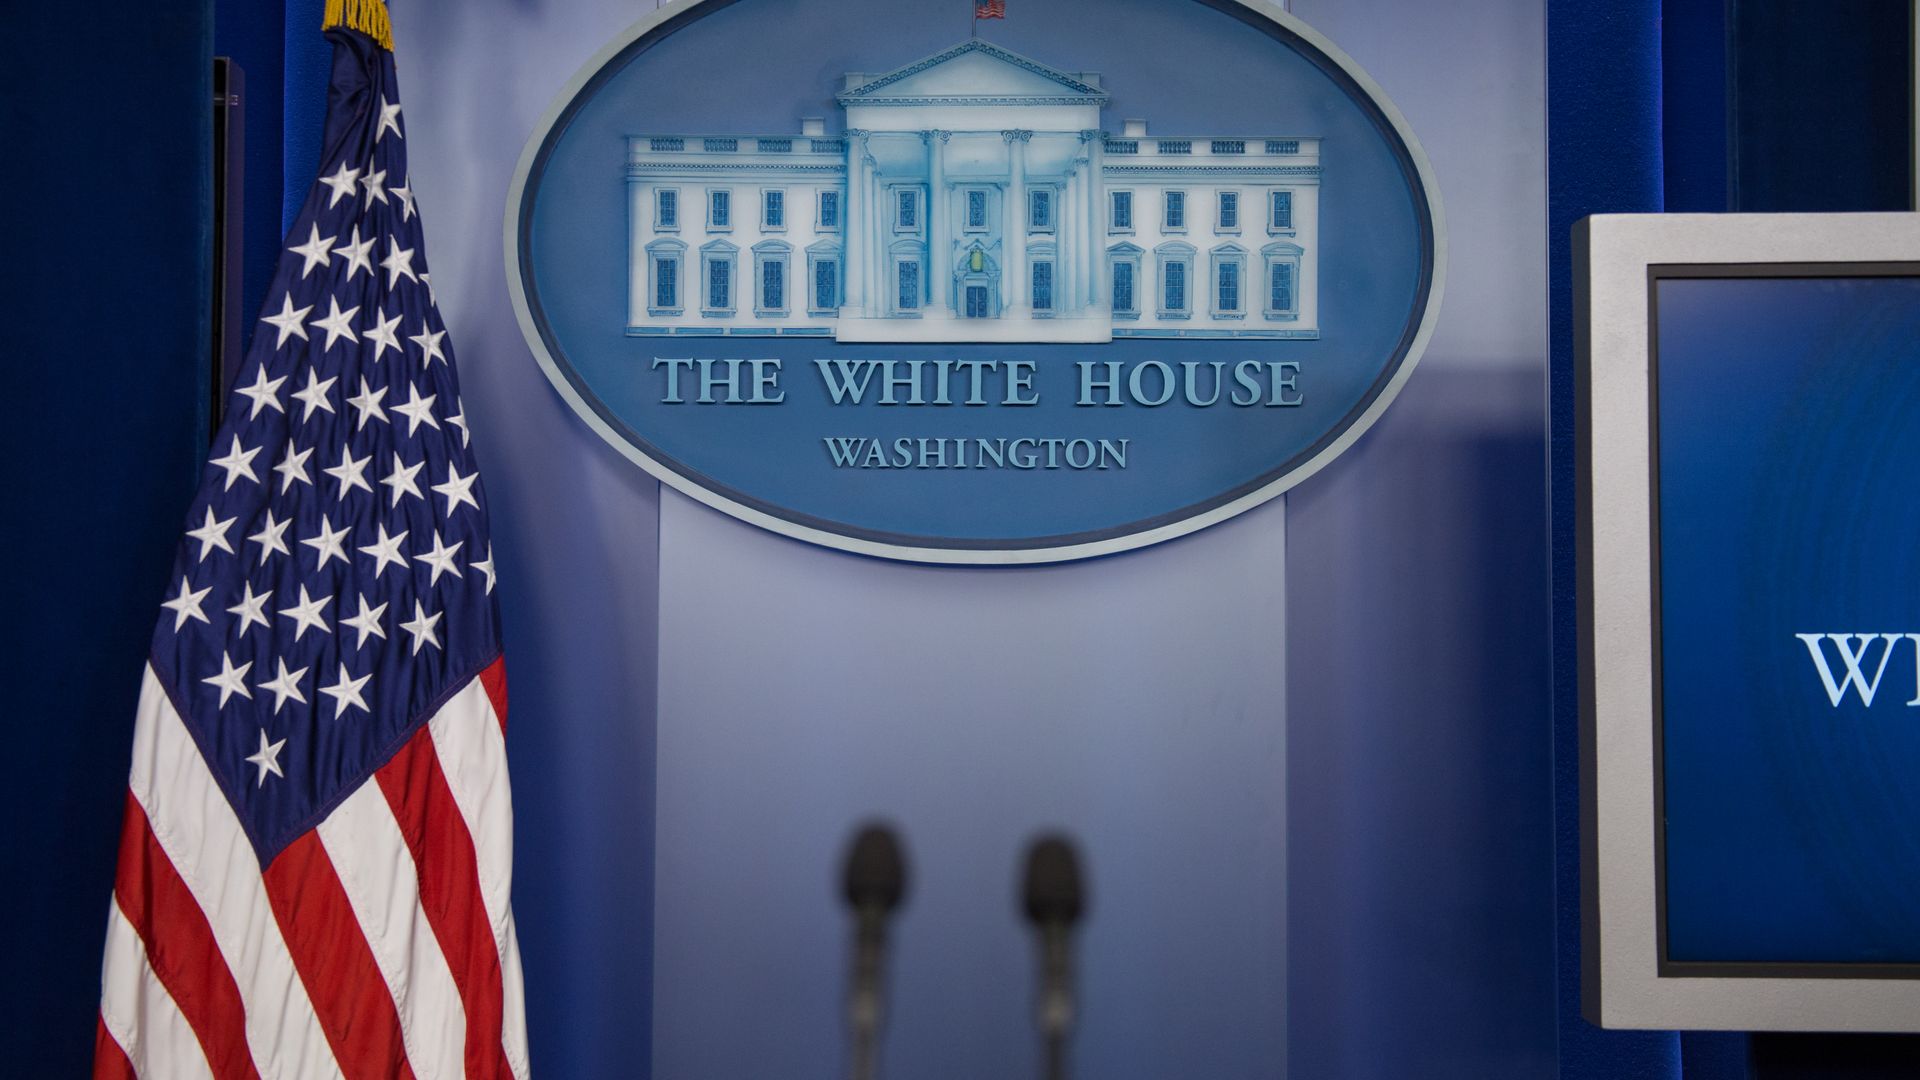 White House logo hangs behind the press secretary's podium in the White House press briefing room.